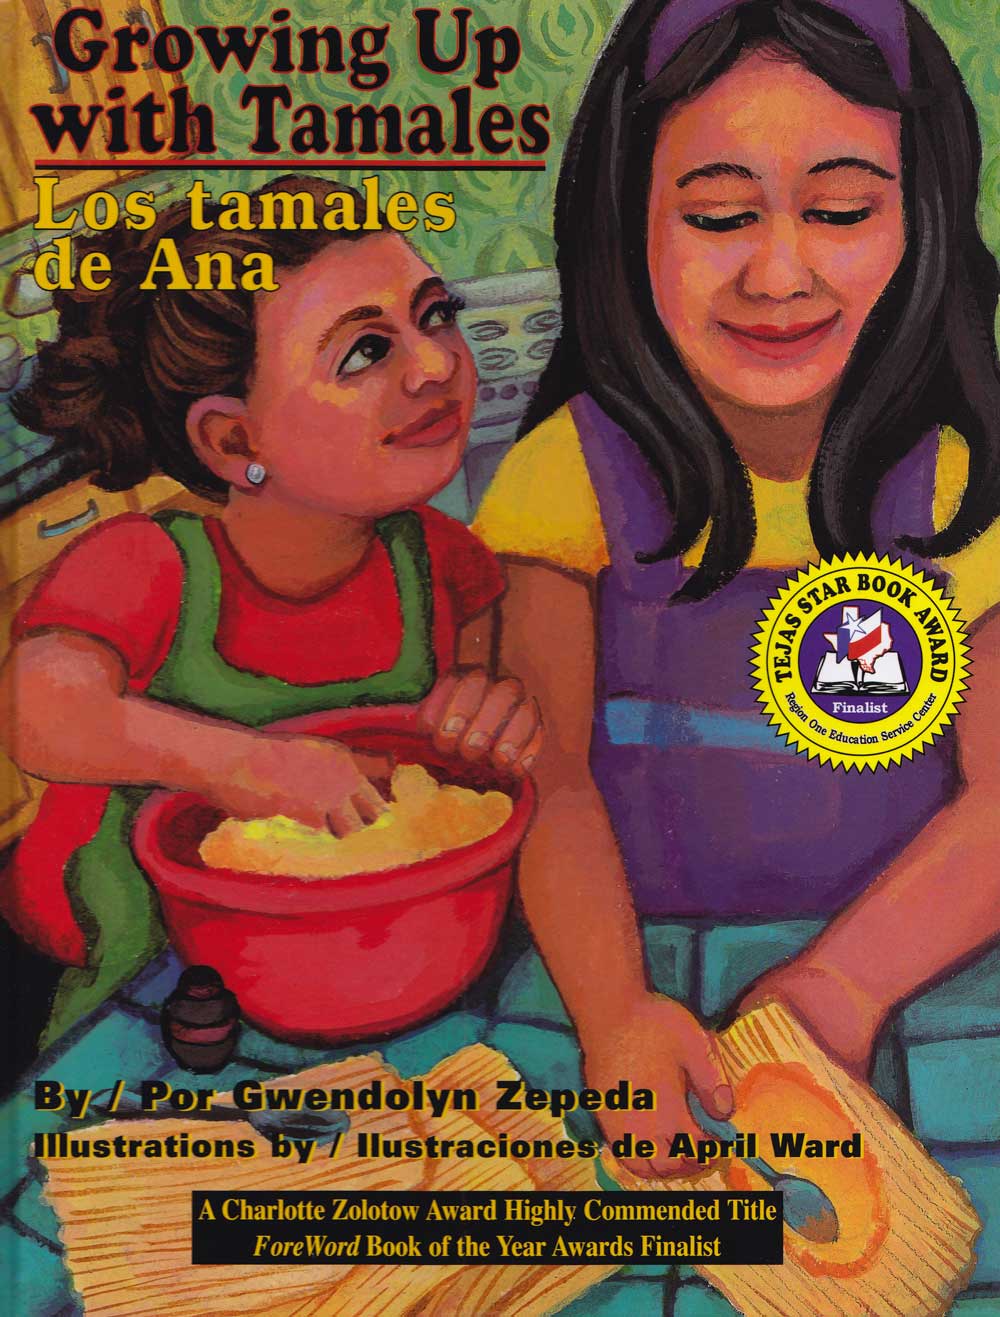 Los tamales de Ana - Growing Up with Tamales, Del Sol Books